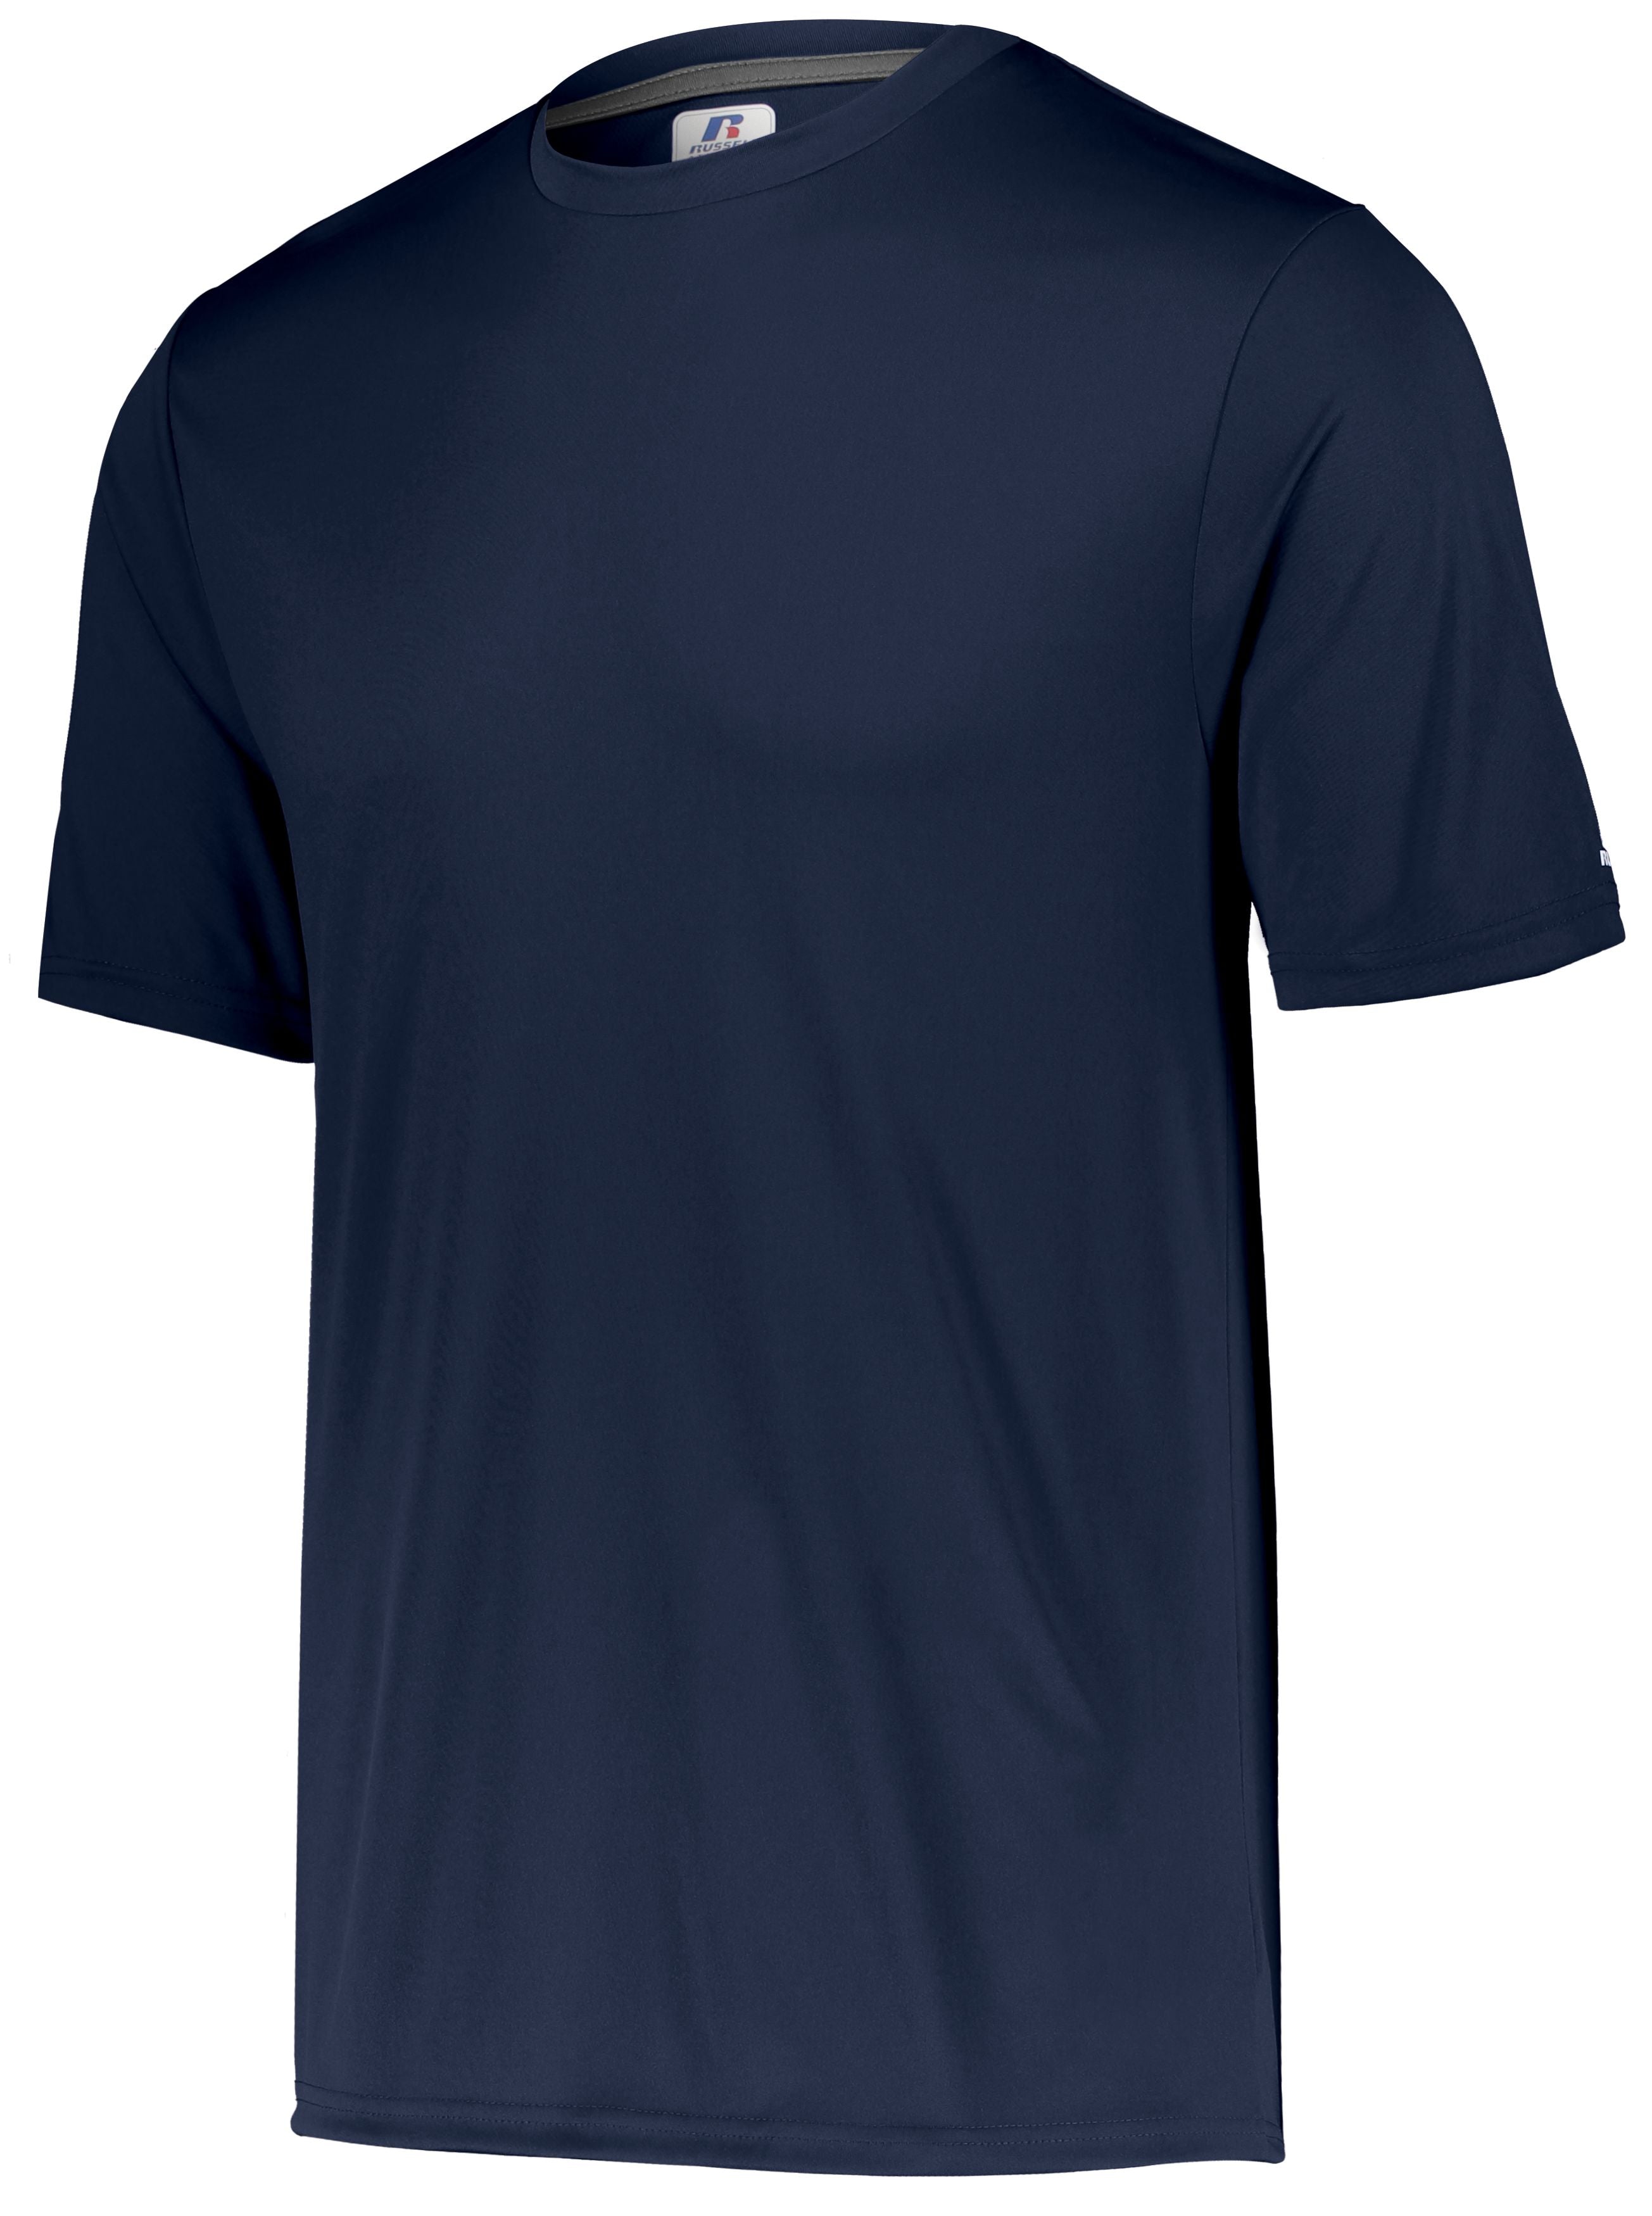 Russell Athletic Youth Dri-Power Core Performance Tee in Navy  -Part of the Youth, Youth-Tee-Shirt, T-Shirts, Russell-Athletic-Products, Shirts product lines at KanaleyCreations.com